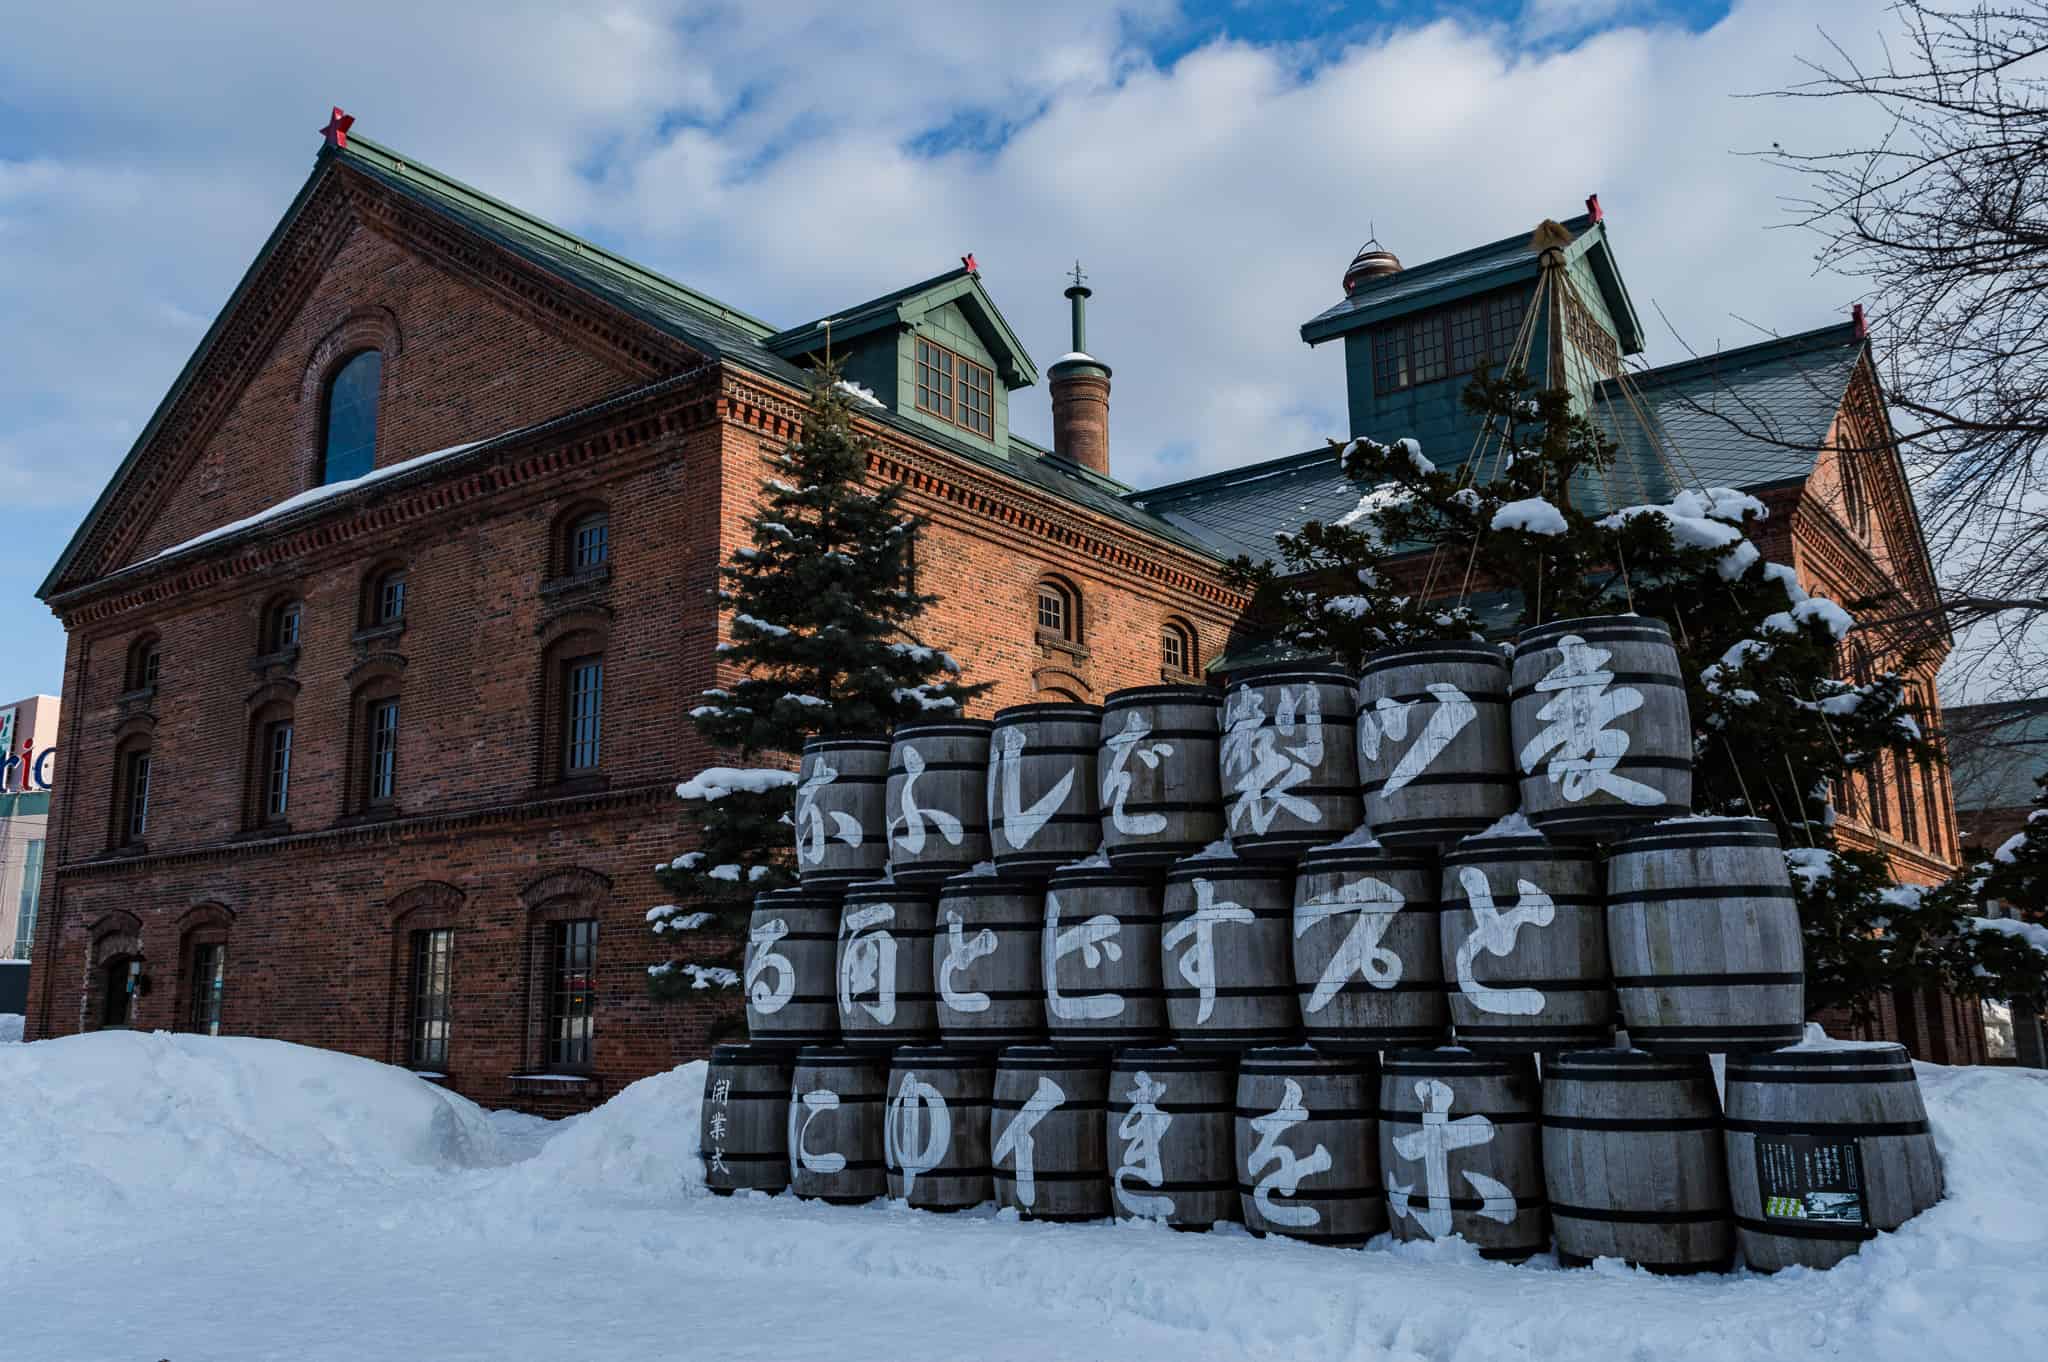 The front of Sapporo Beer factory and Museum, Sapporo, Japan